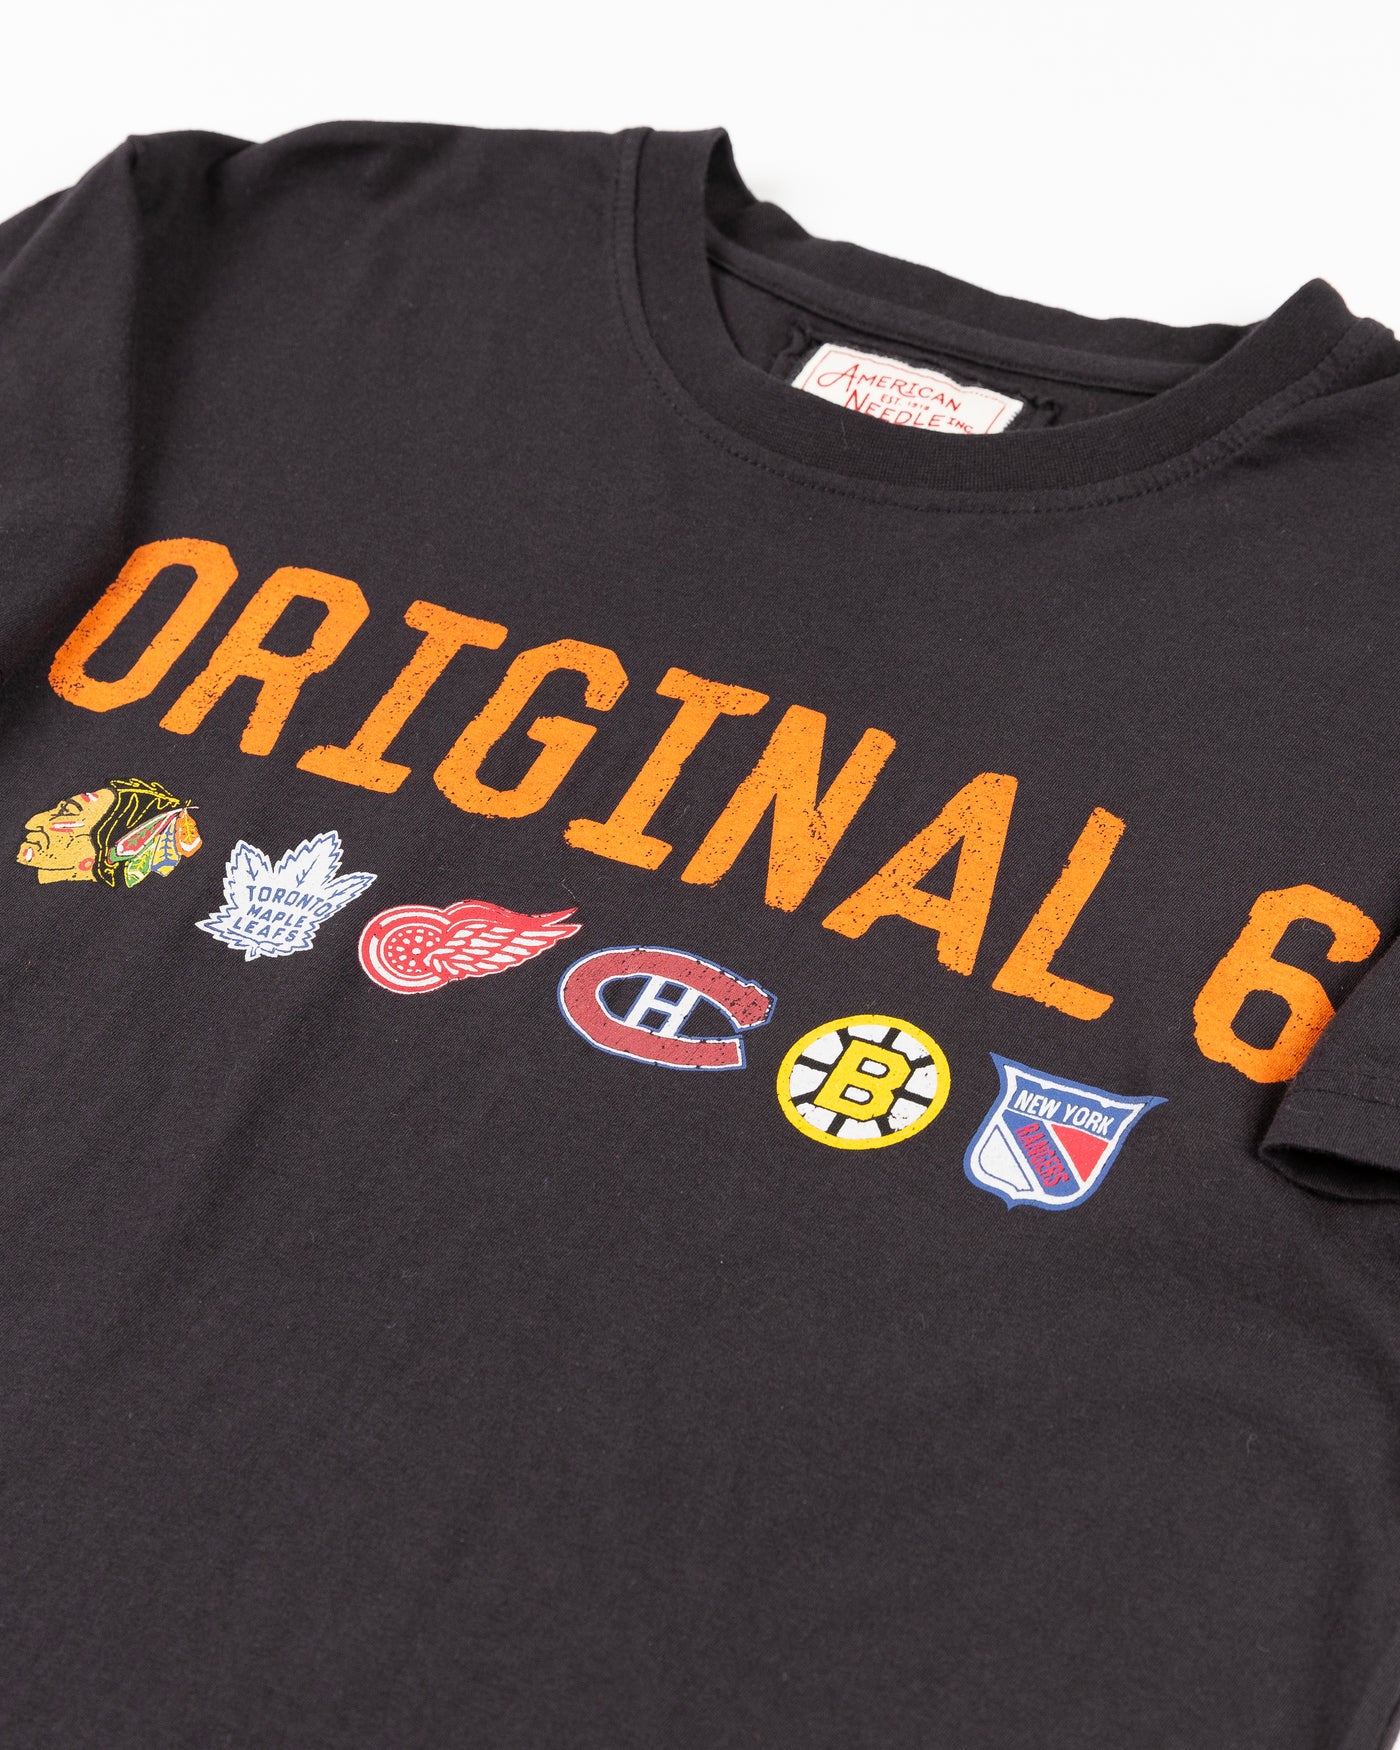 black American Needle tee with Original Six graphic across chest and NHL logo on left shoulder - front detail lay flat